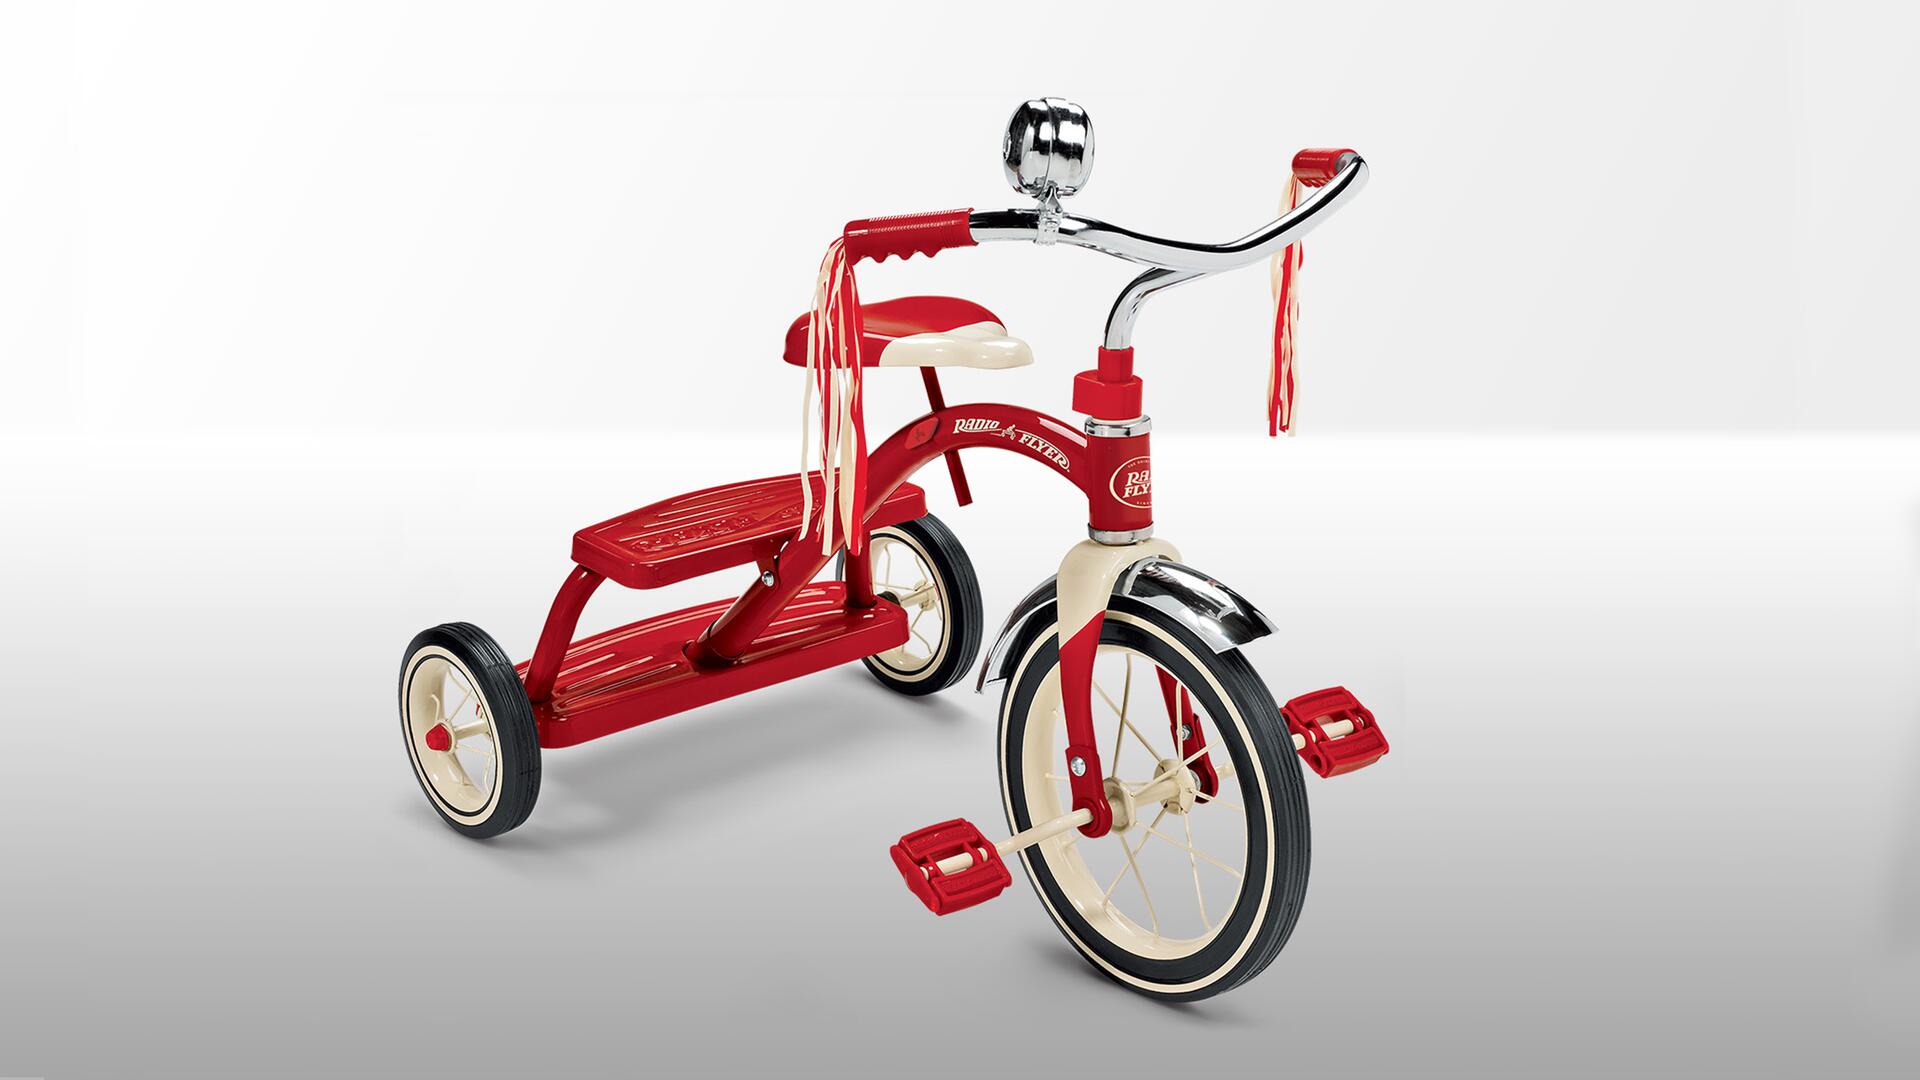 20C-02_Radio Flyer: Classic Red Dual Deck Tricycle_Robert F. Pasin/Gary T. Chiappetta